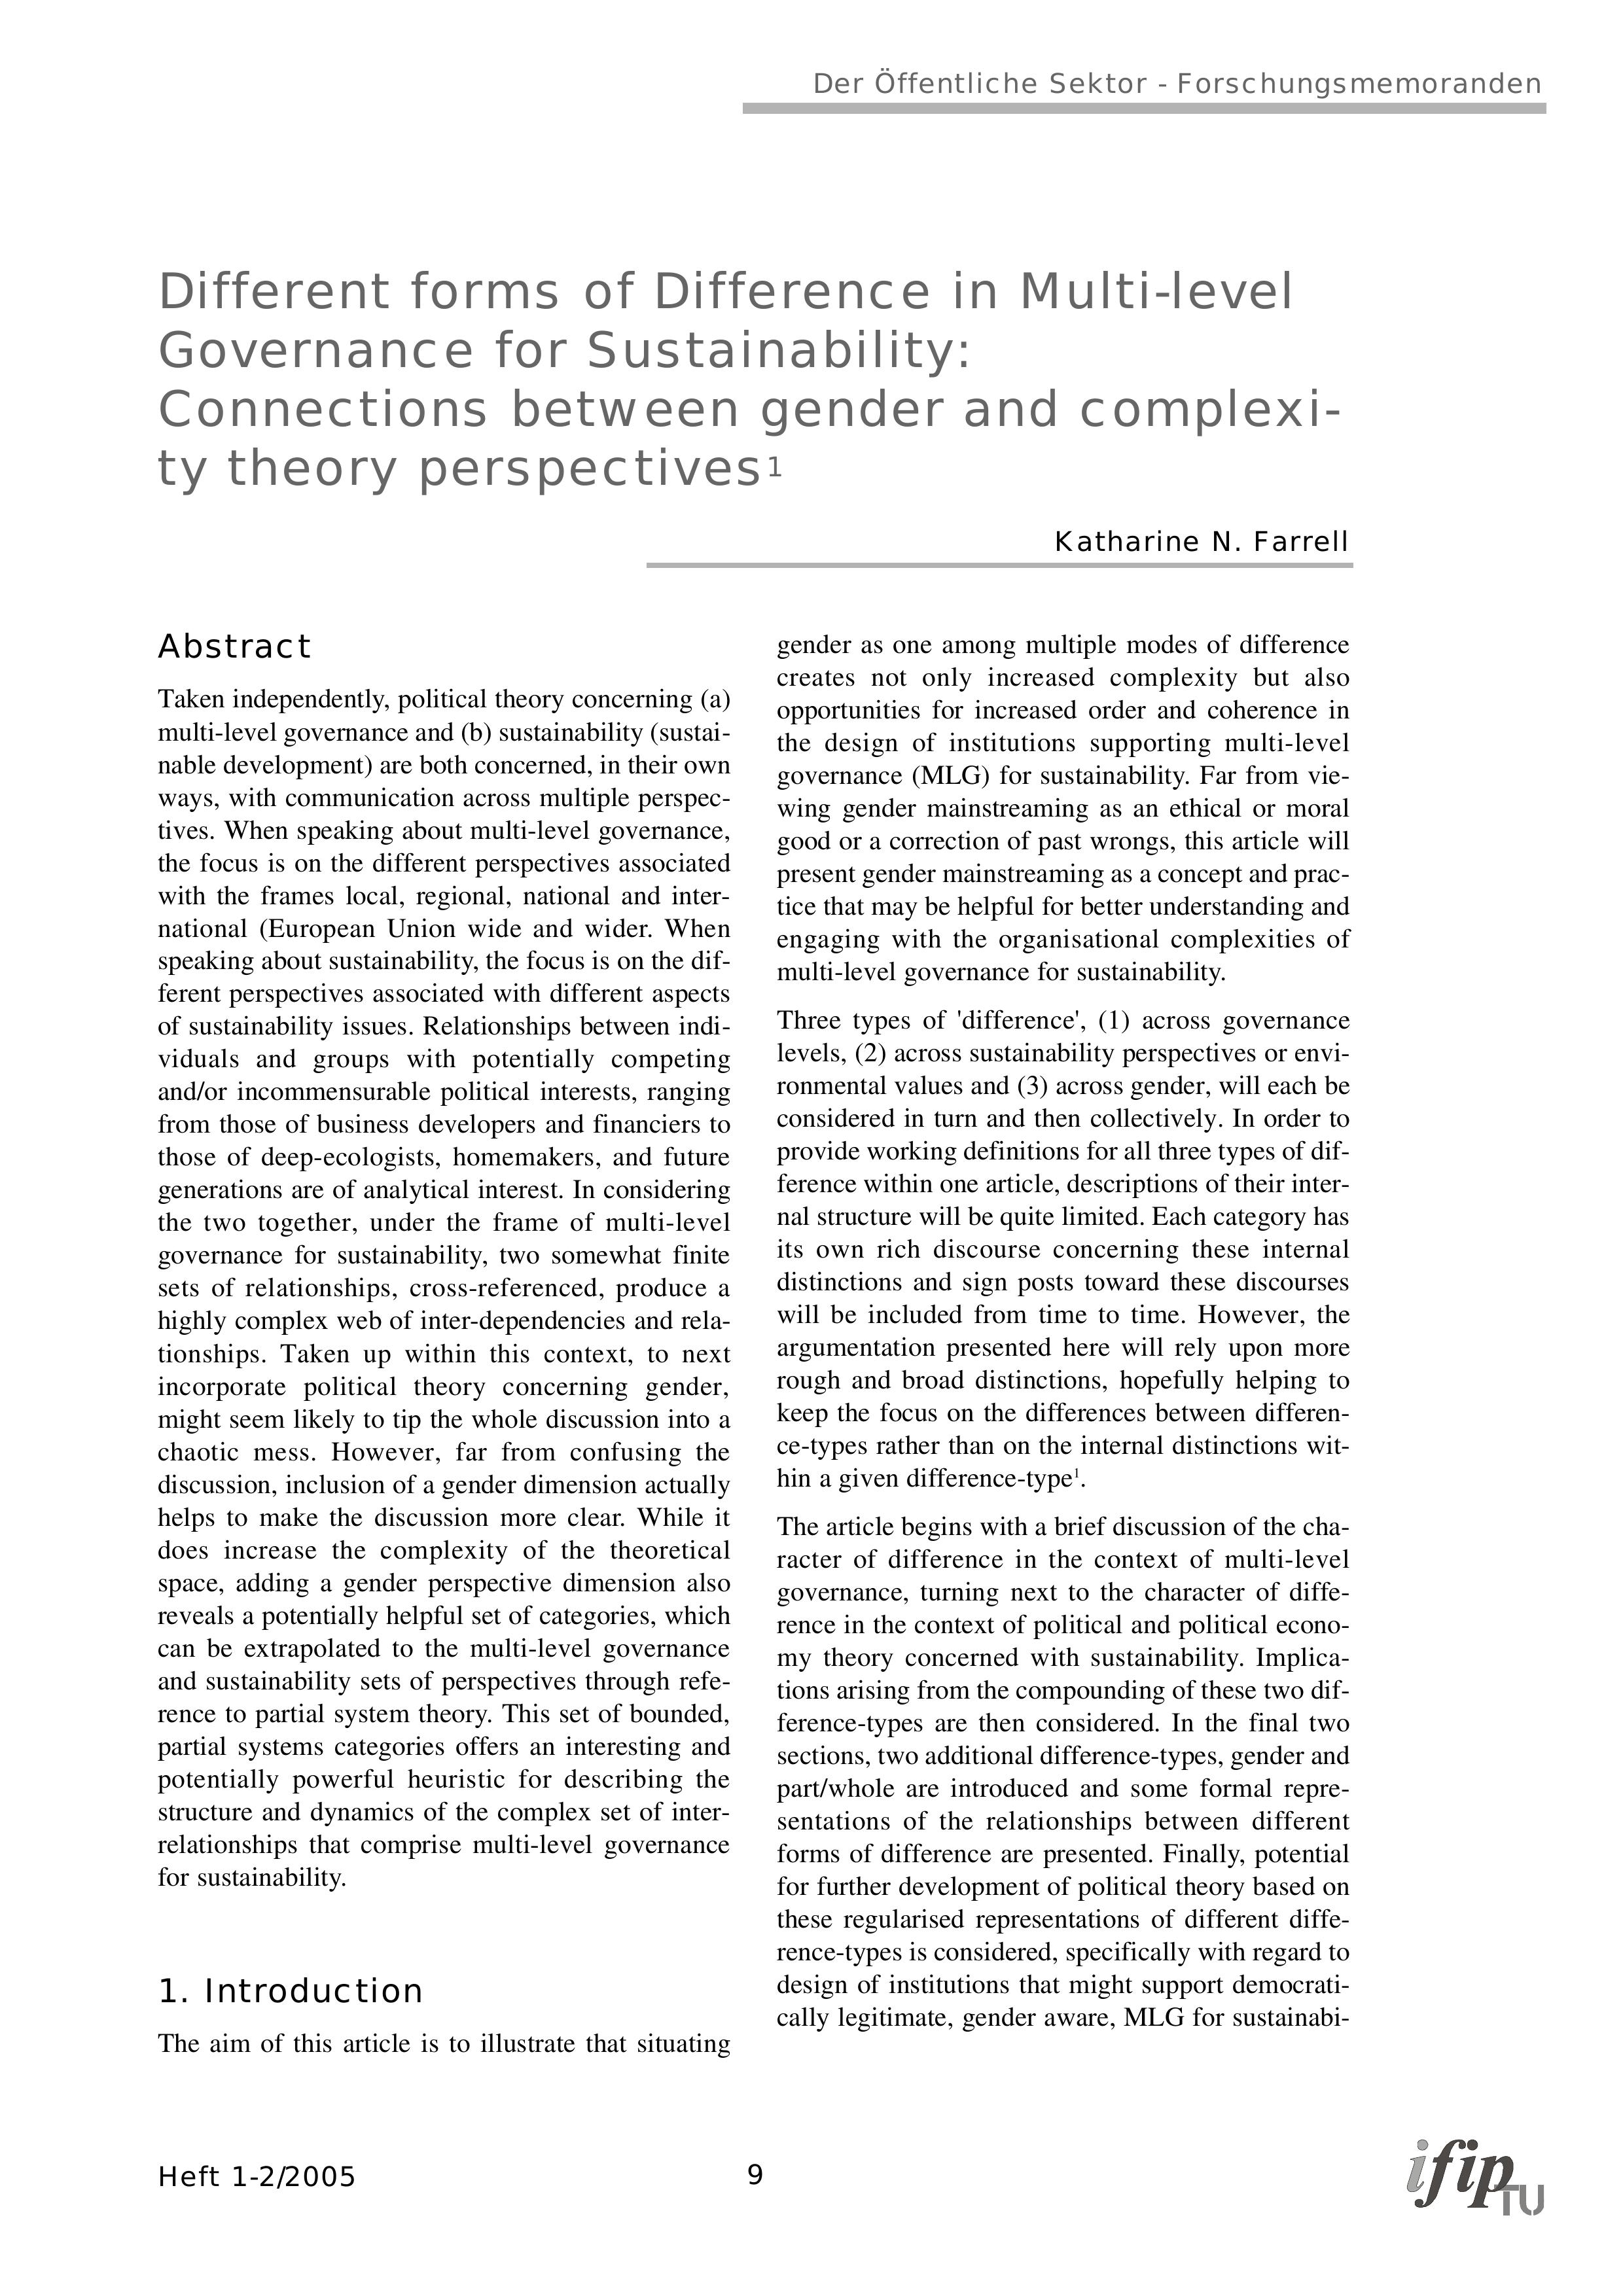 Different forms of Difference in Multi-Level Governance for Sustainability: Connections between gender and complexity theory perspectives